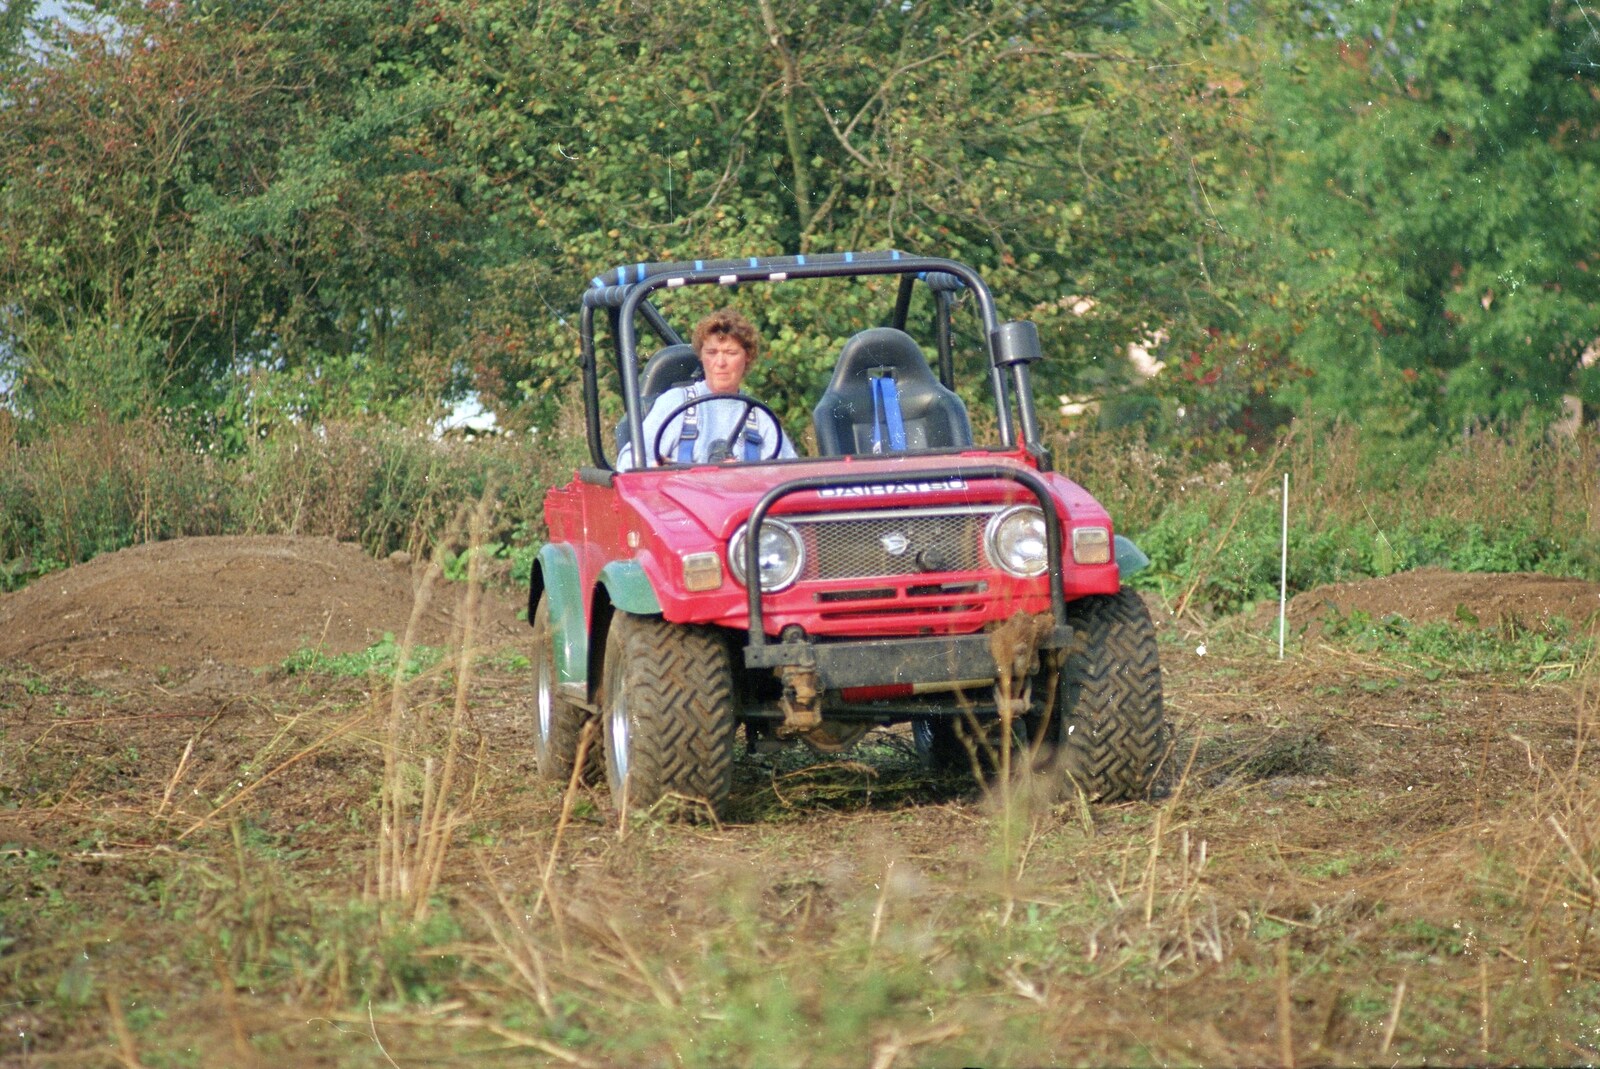 Brenda spins around off road from Cider Making With Geoff and Brenda, Stuston, Suffolk - 10th September 1998